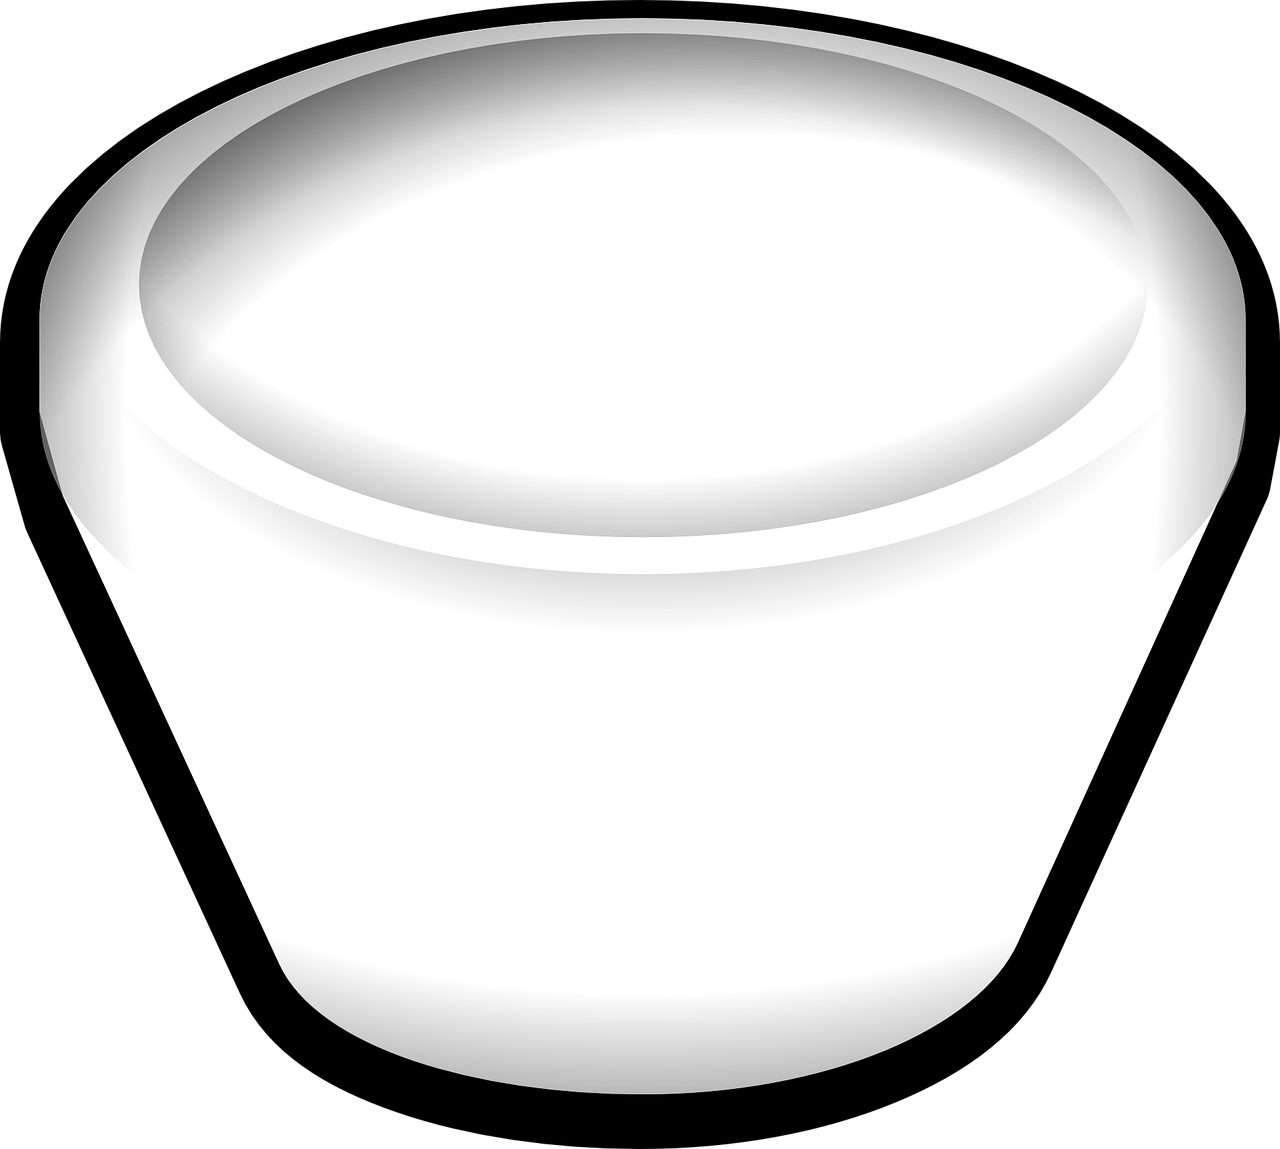 bowl,white,container,food,empty,plastic,glass,storage,store,free vector graphics,free pictures, free photos, free images, royalty free, free illustrations, public domain